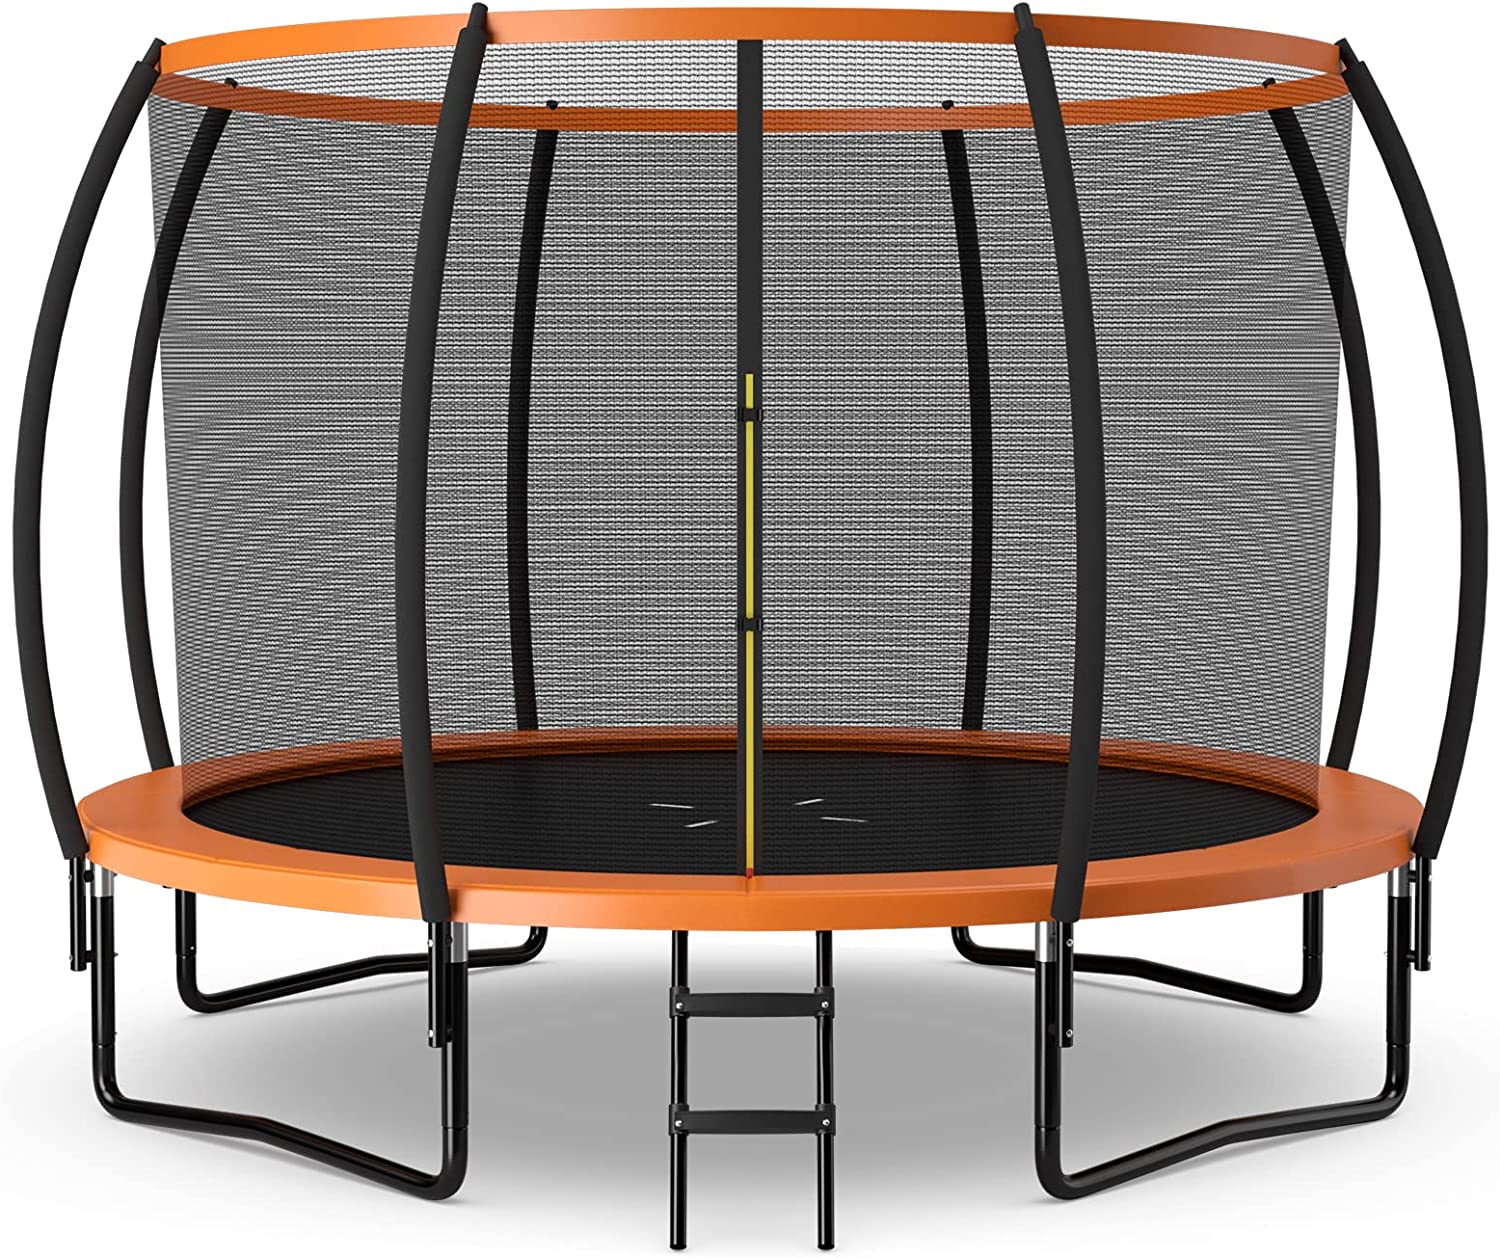 Giantex 8FT 10FT 12FT Trampoline with Enclosure, ASTM Approved Outdoor Large Trampoline with Ladder